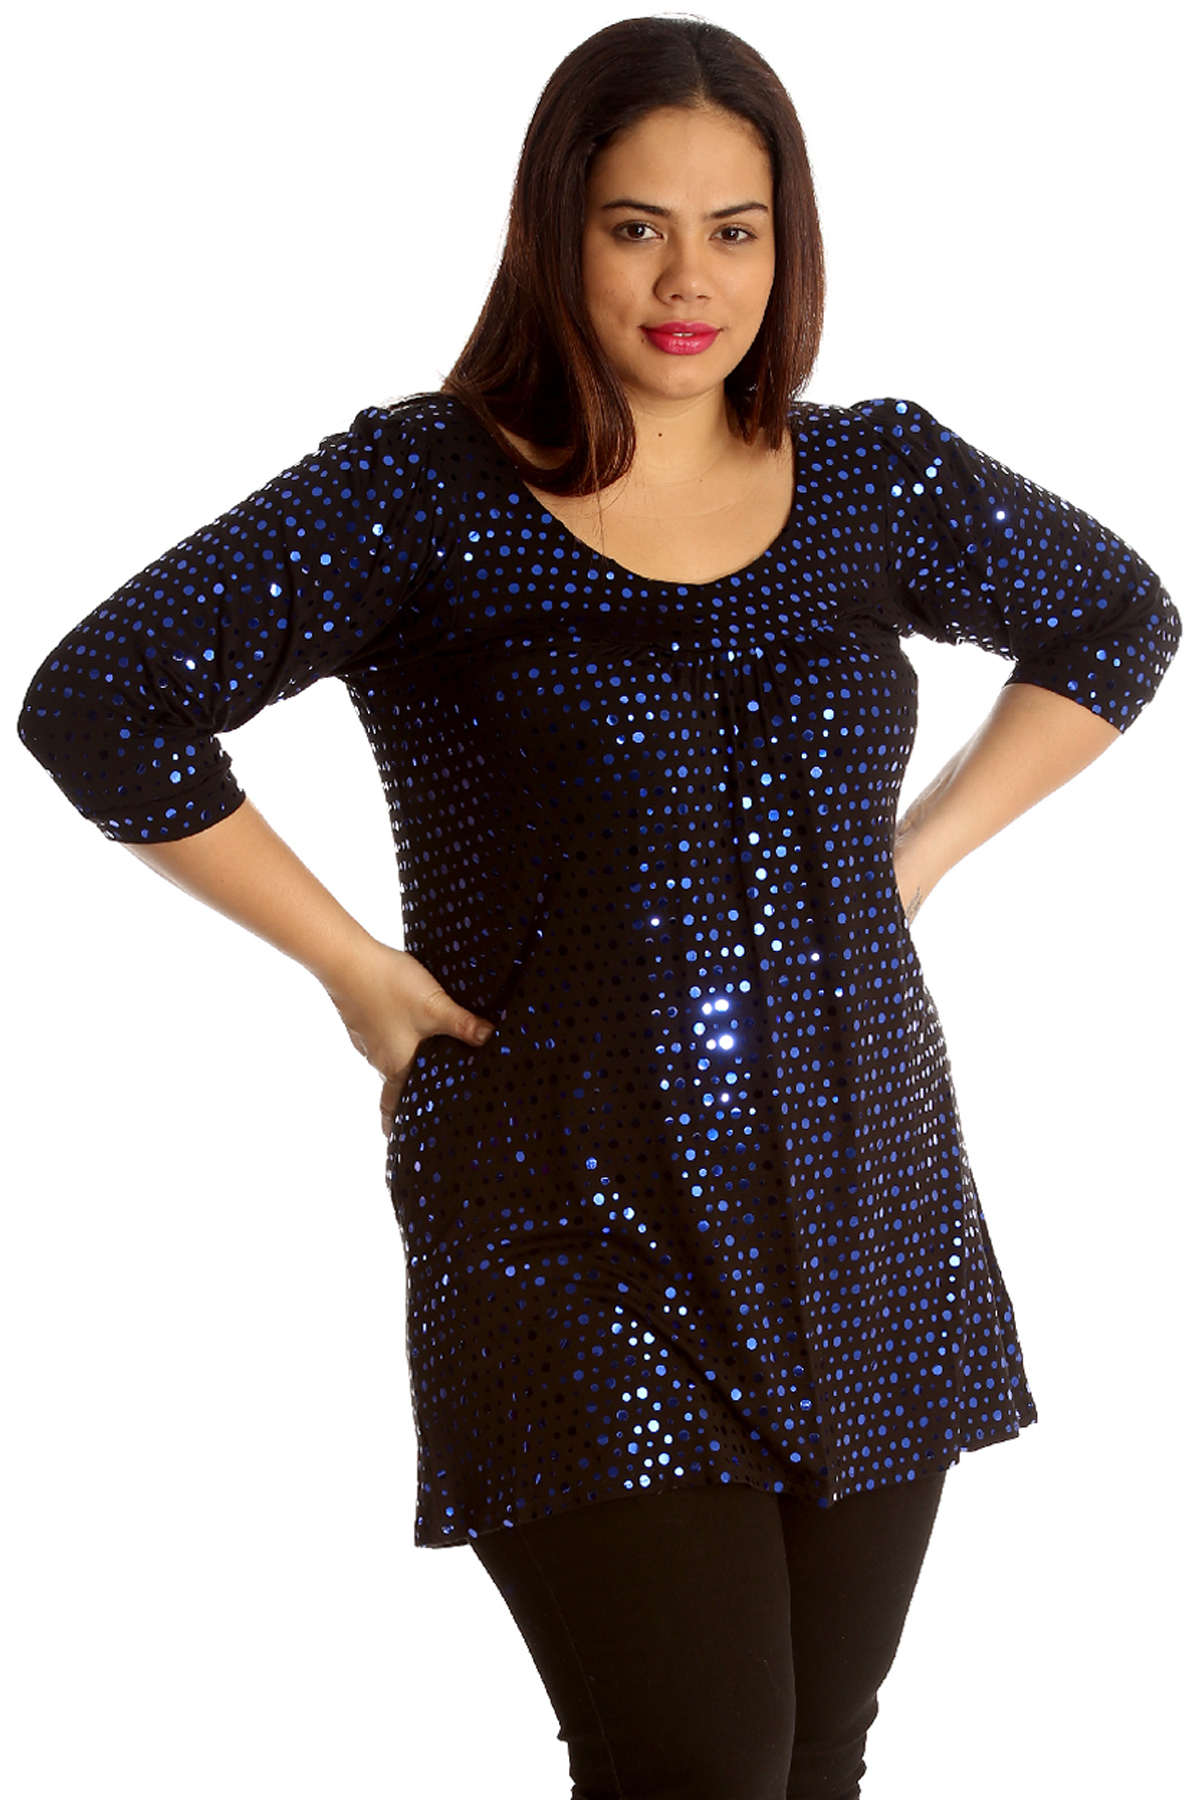 IN'VOLAND Women's Plus Size Sequin Top Shimmer Tank Tops Sparkle Glitter  Embelli